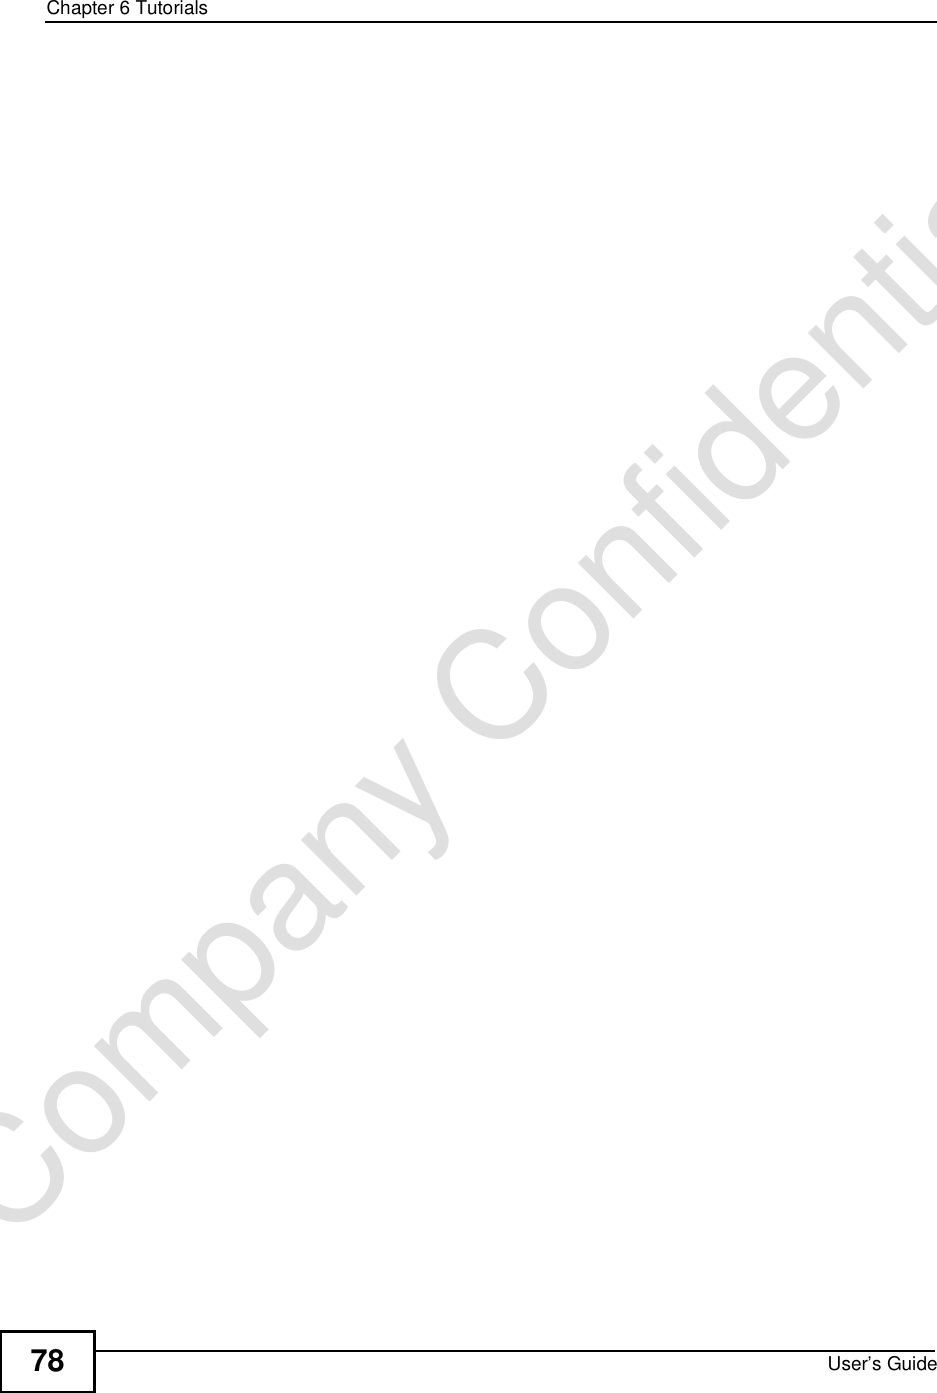 Chapter 6TutorialsUser’s Guide78Company Confidential